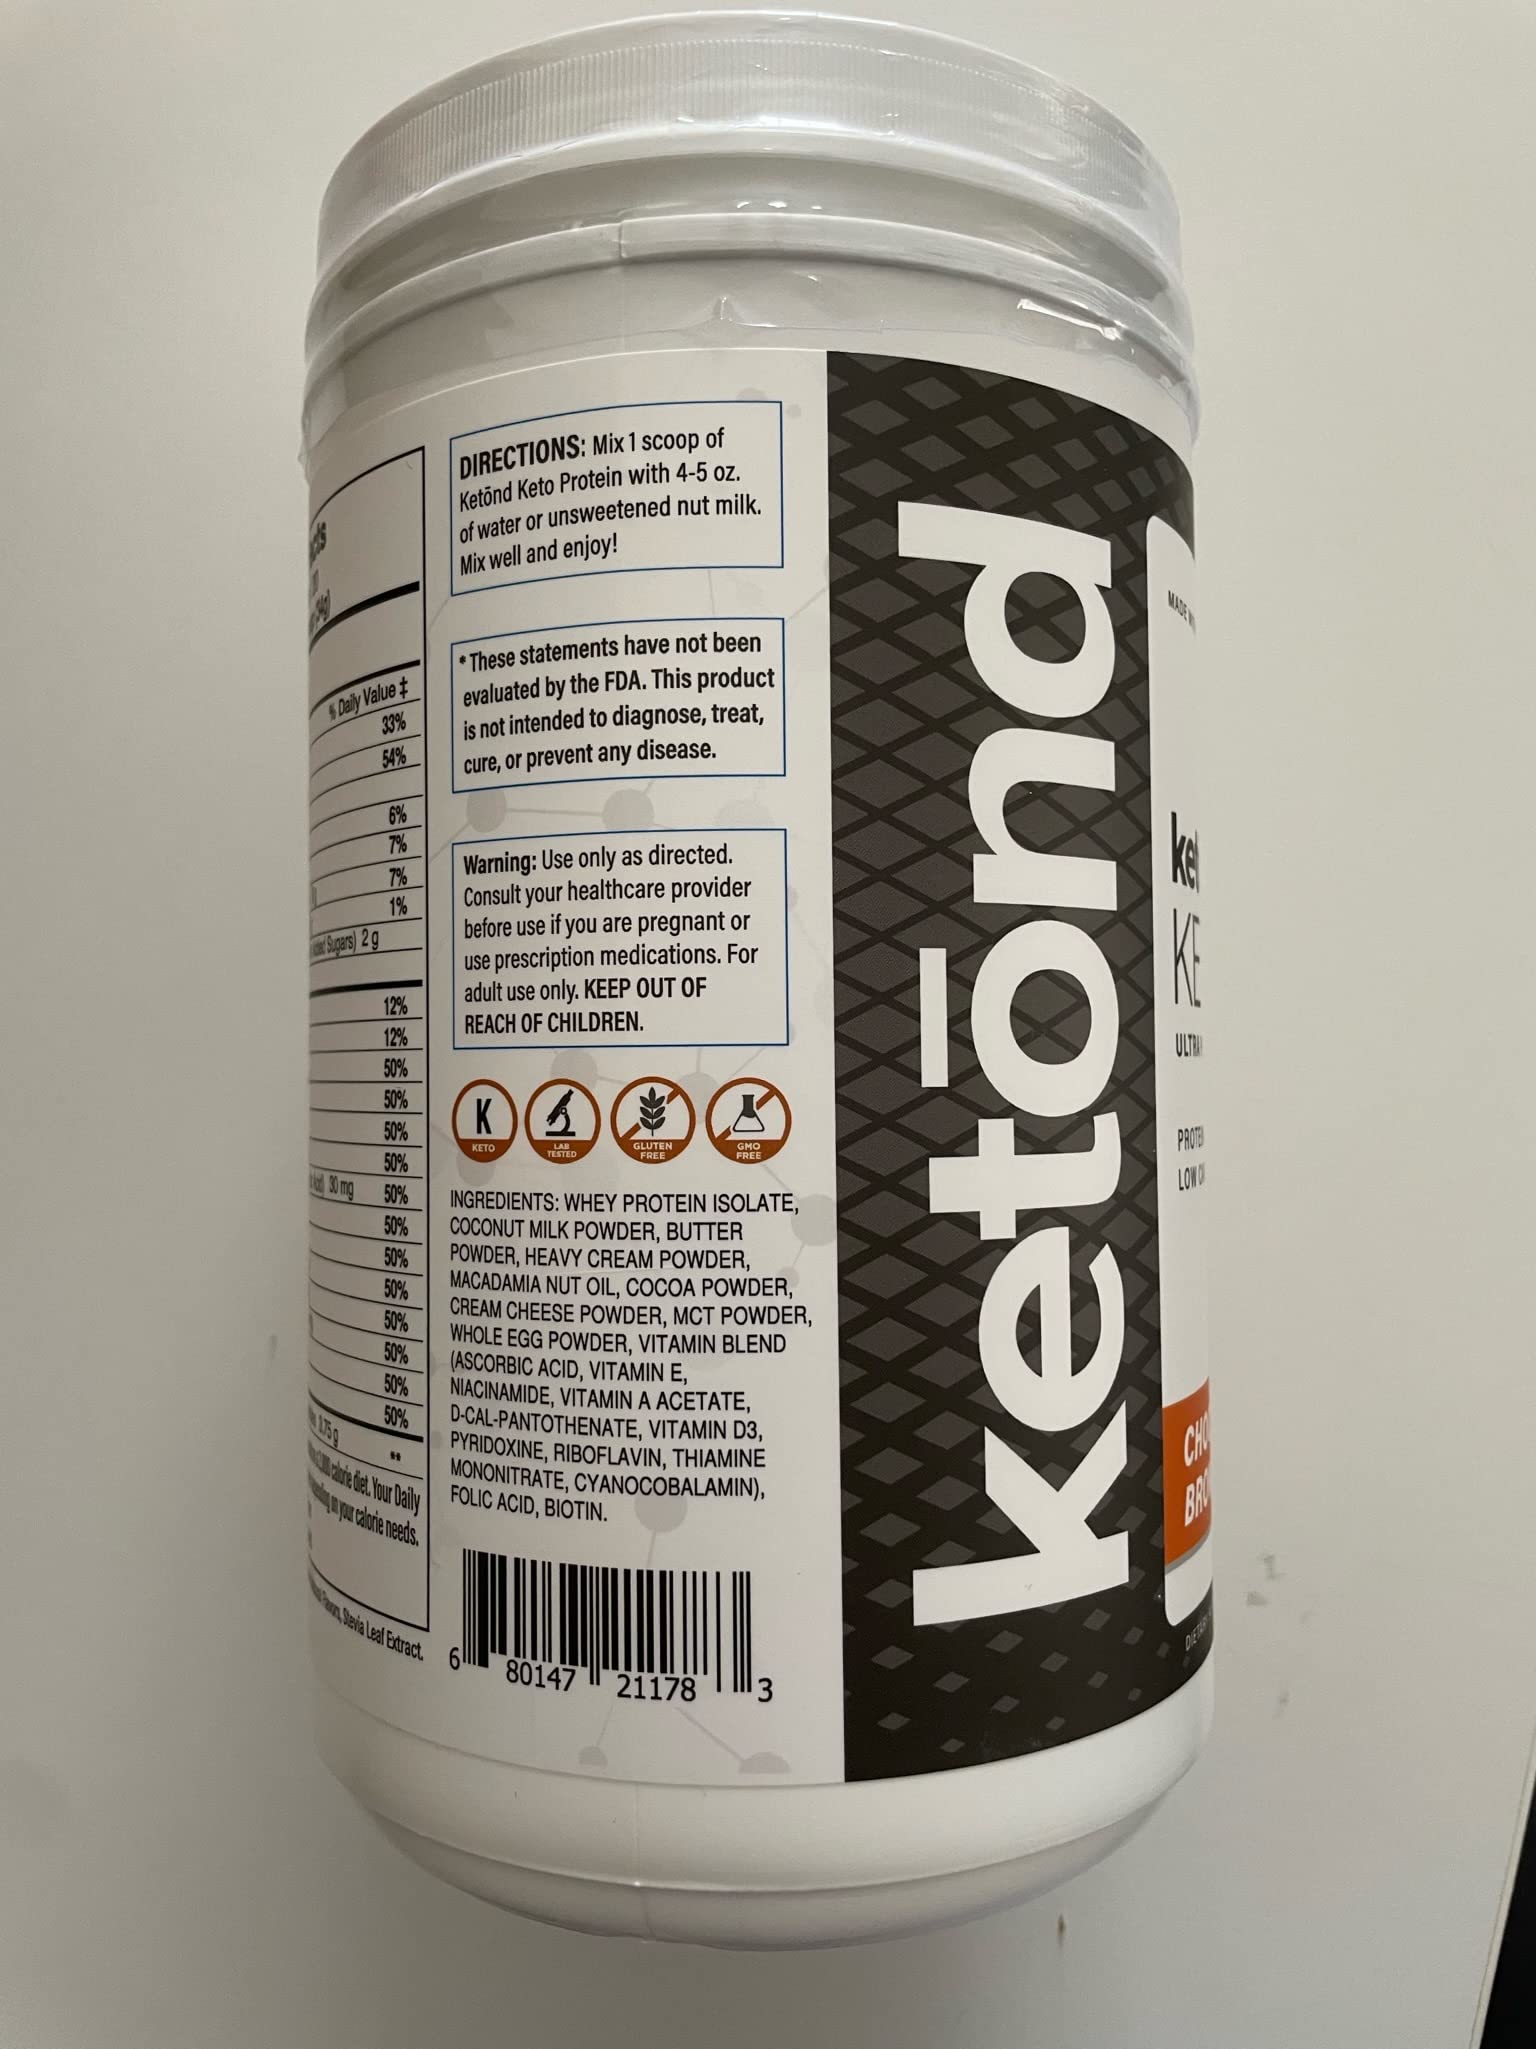 Ketogenic Protein Powder by Ketond - Low Carb, Rich in MCTs from Coconut and Macadamia Nut Powder, Whey Protein Isolate, Whole Eggs, Supports Weight Loss - Chocolate Fudge Brownie 20 servings